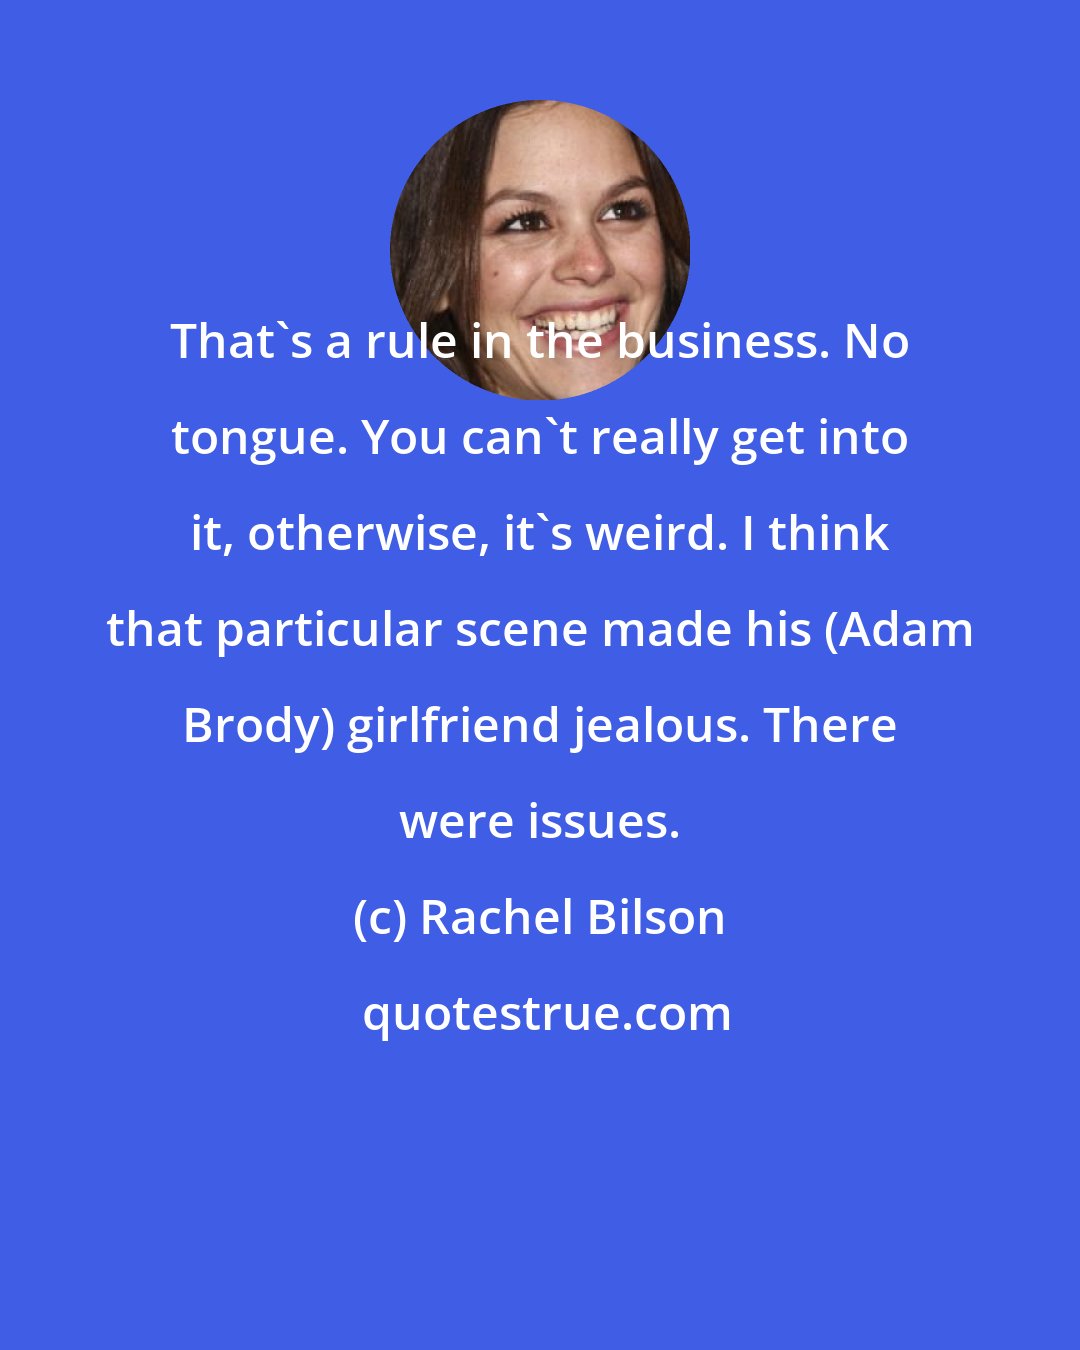 Rachel Bilson: That's a rule in the business. No tongue. You can't really get into it, otherwise, it's weird. I think that particular scene made his (Adam Brody) girlfriend jealous. There were issues.